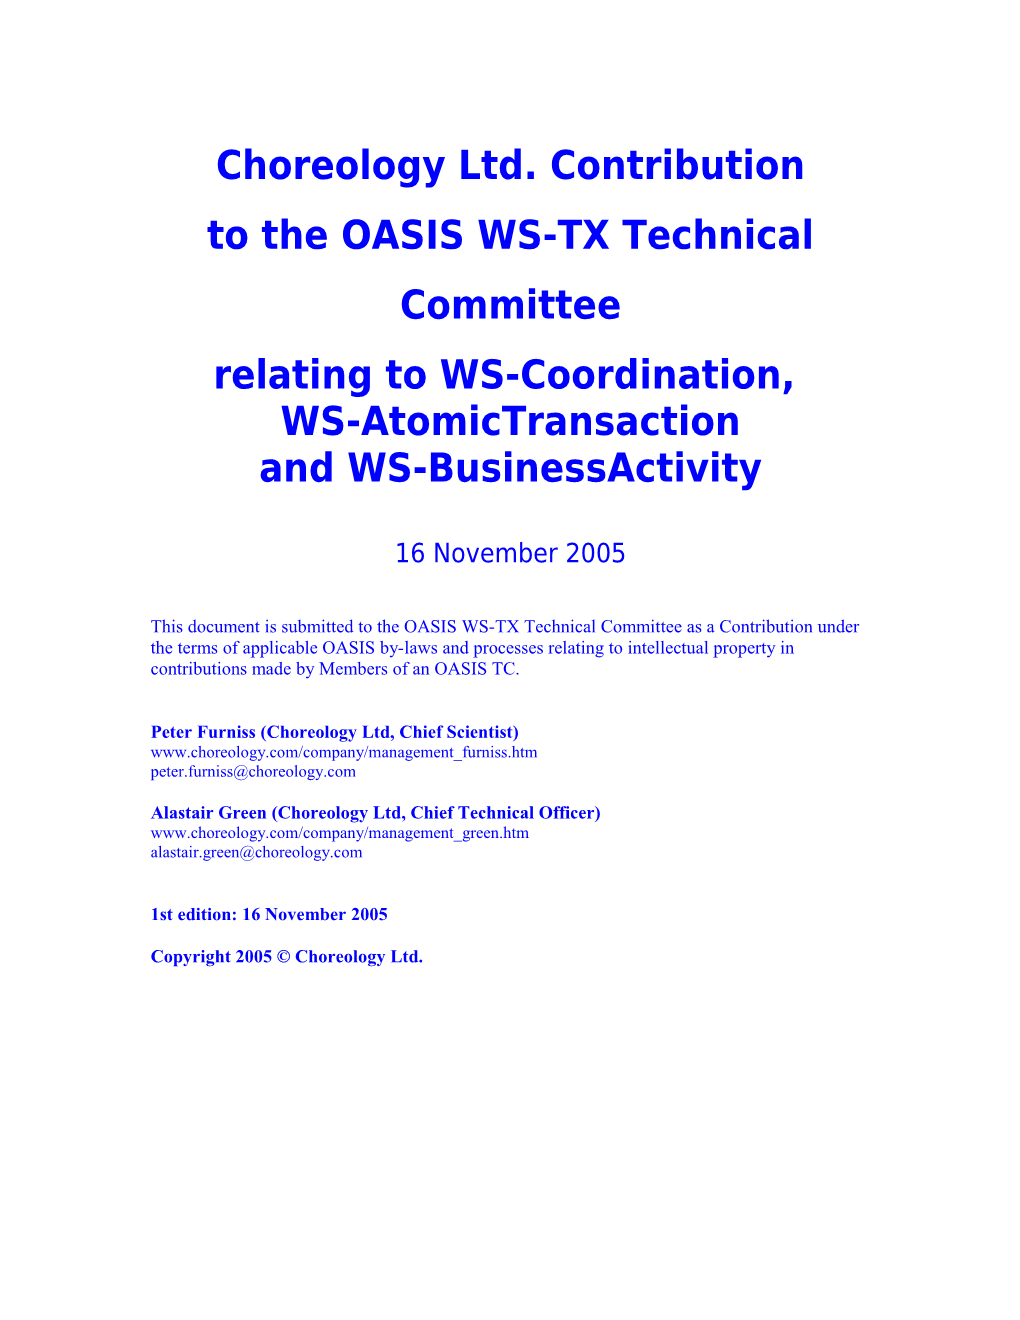 Choreology Ltd Feedback on WS-Coordination, WS-Atomictransaction and WS-Businessactivity